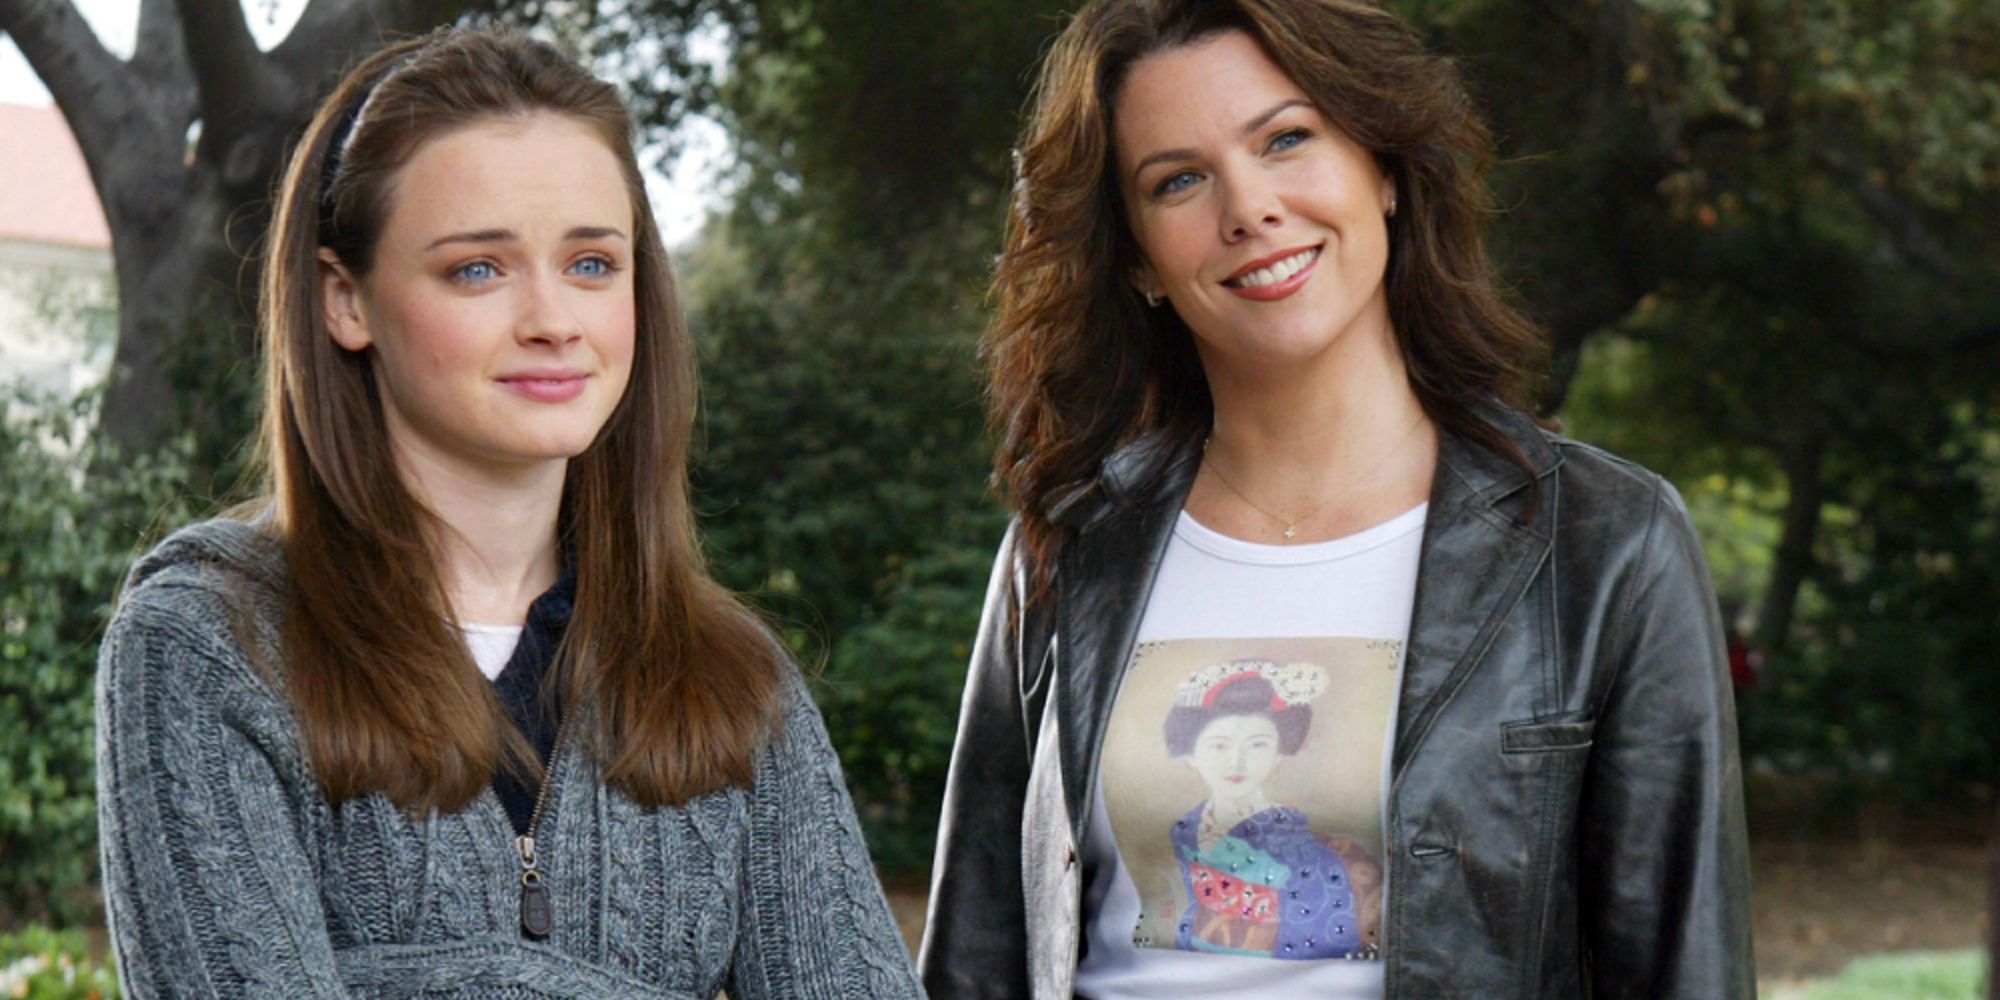 Rory (Alexis Bledel) and Lorelai (Lauren Graham) smiling together in Gilmore Girls.